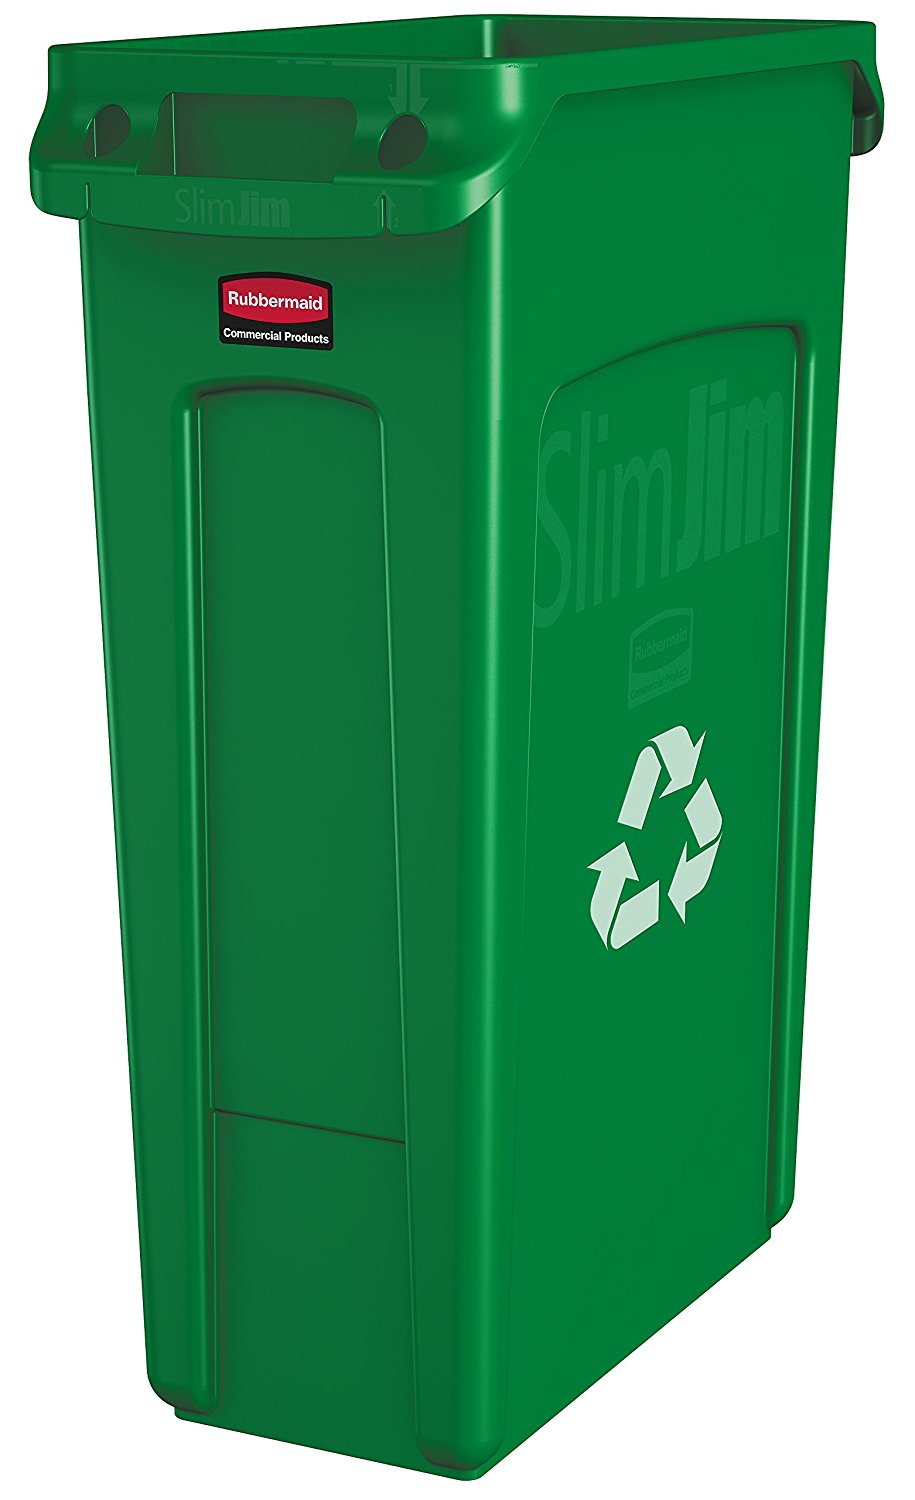 Amazon.com: Rubbermaid Commercial Slim Jim Recycling Container ...